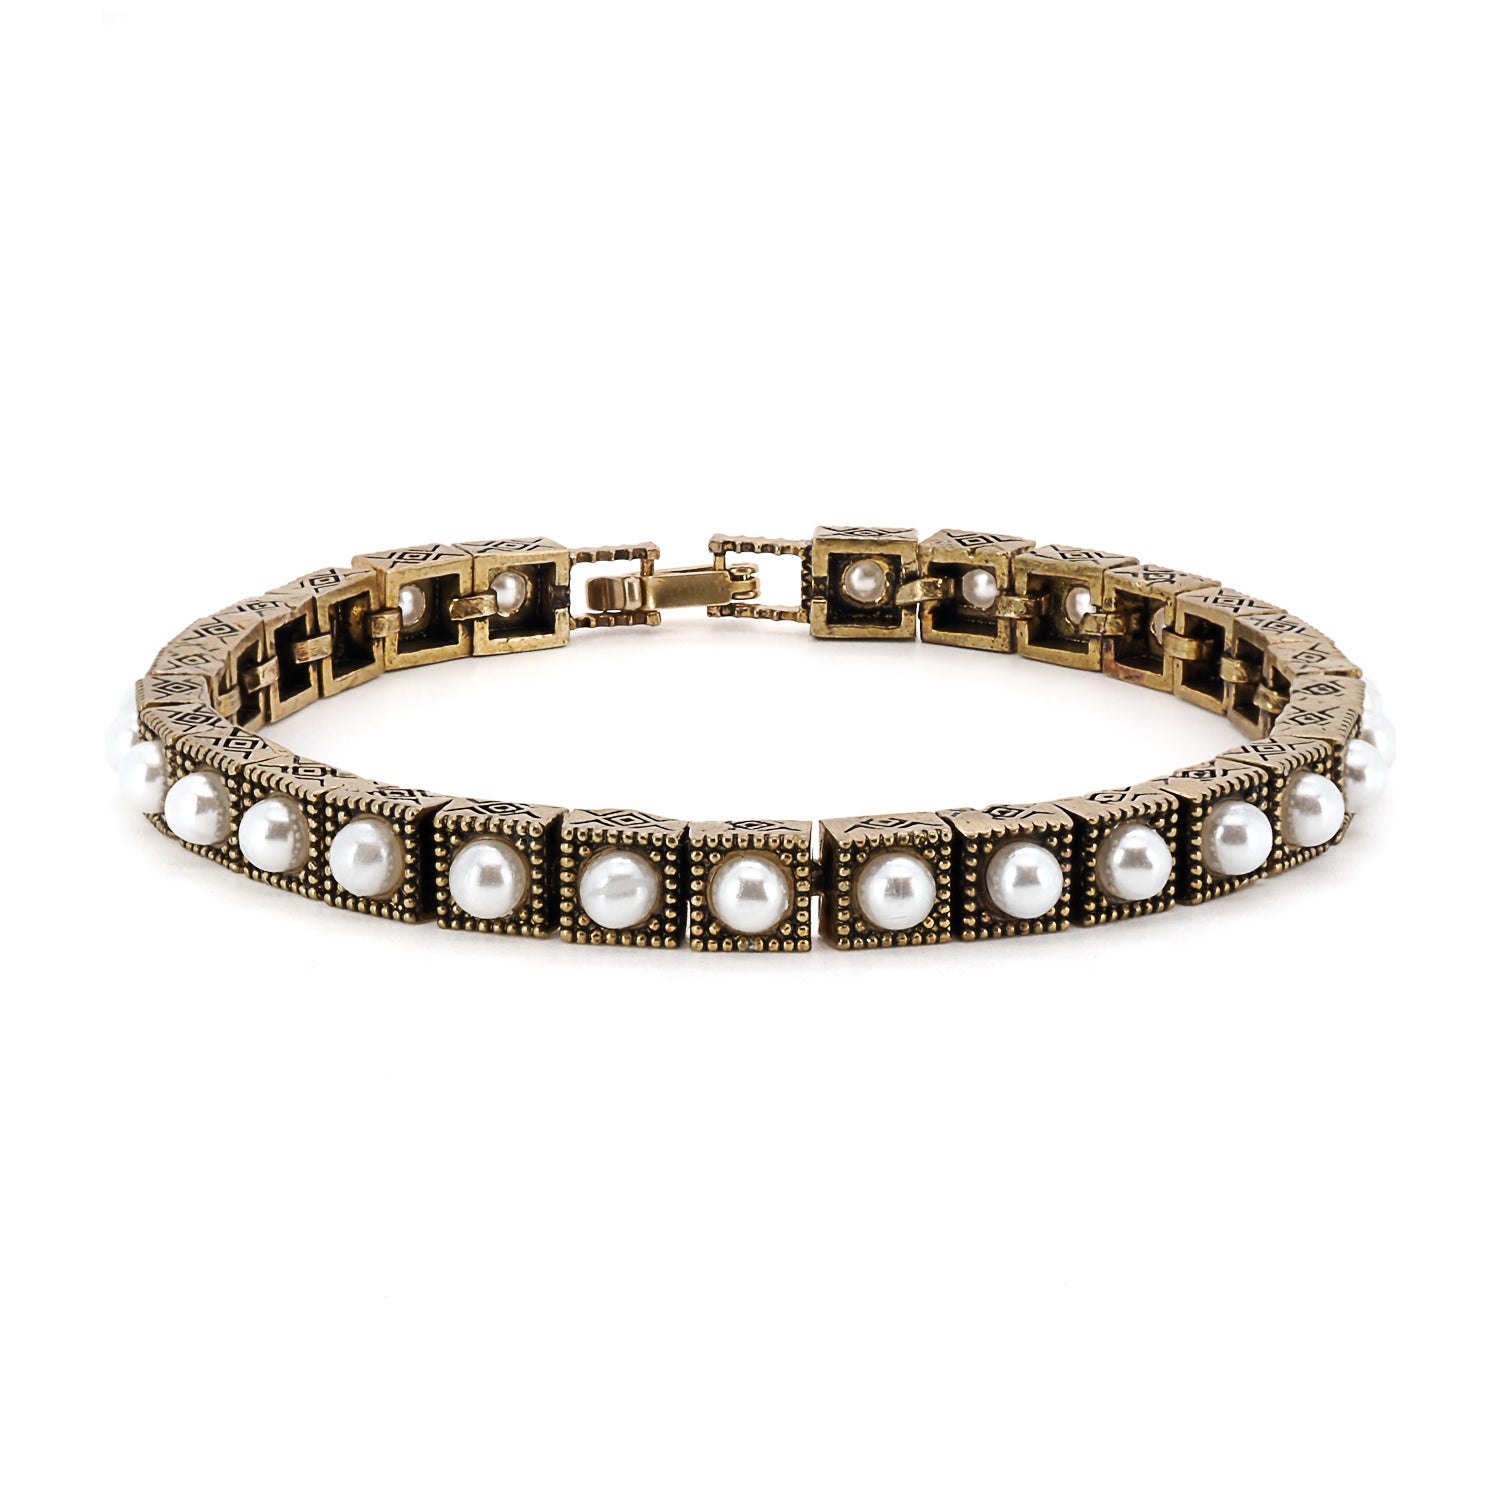 The Pearl Tennis Bracelet, a handcrafted piece of elegance and sophistication.